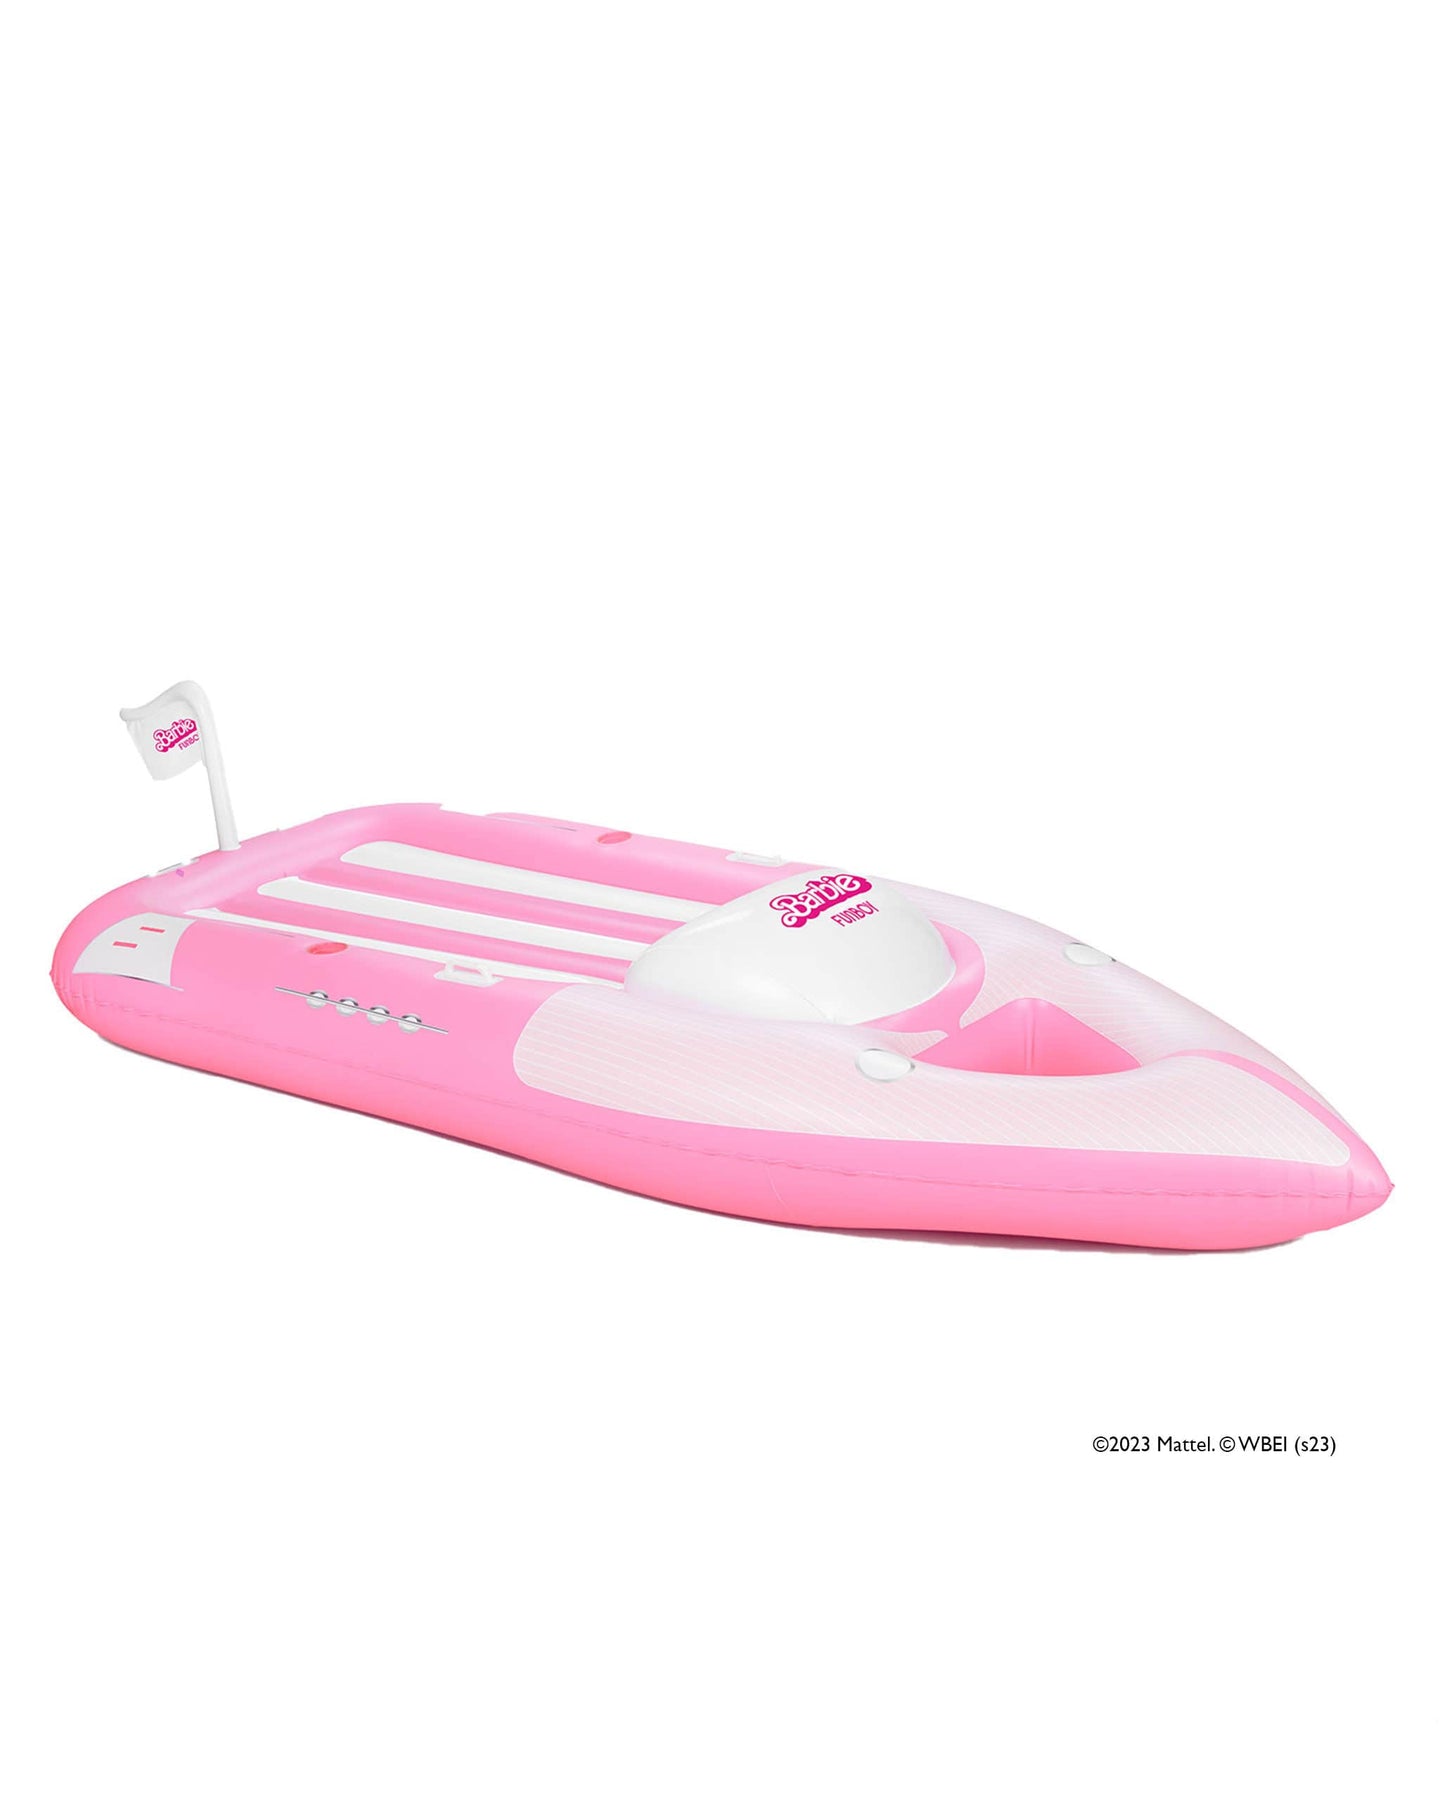 Barbie Movie Official Pink Speed Boat Pool Float Yacht